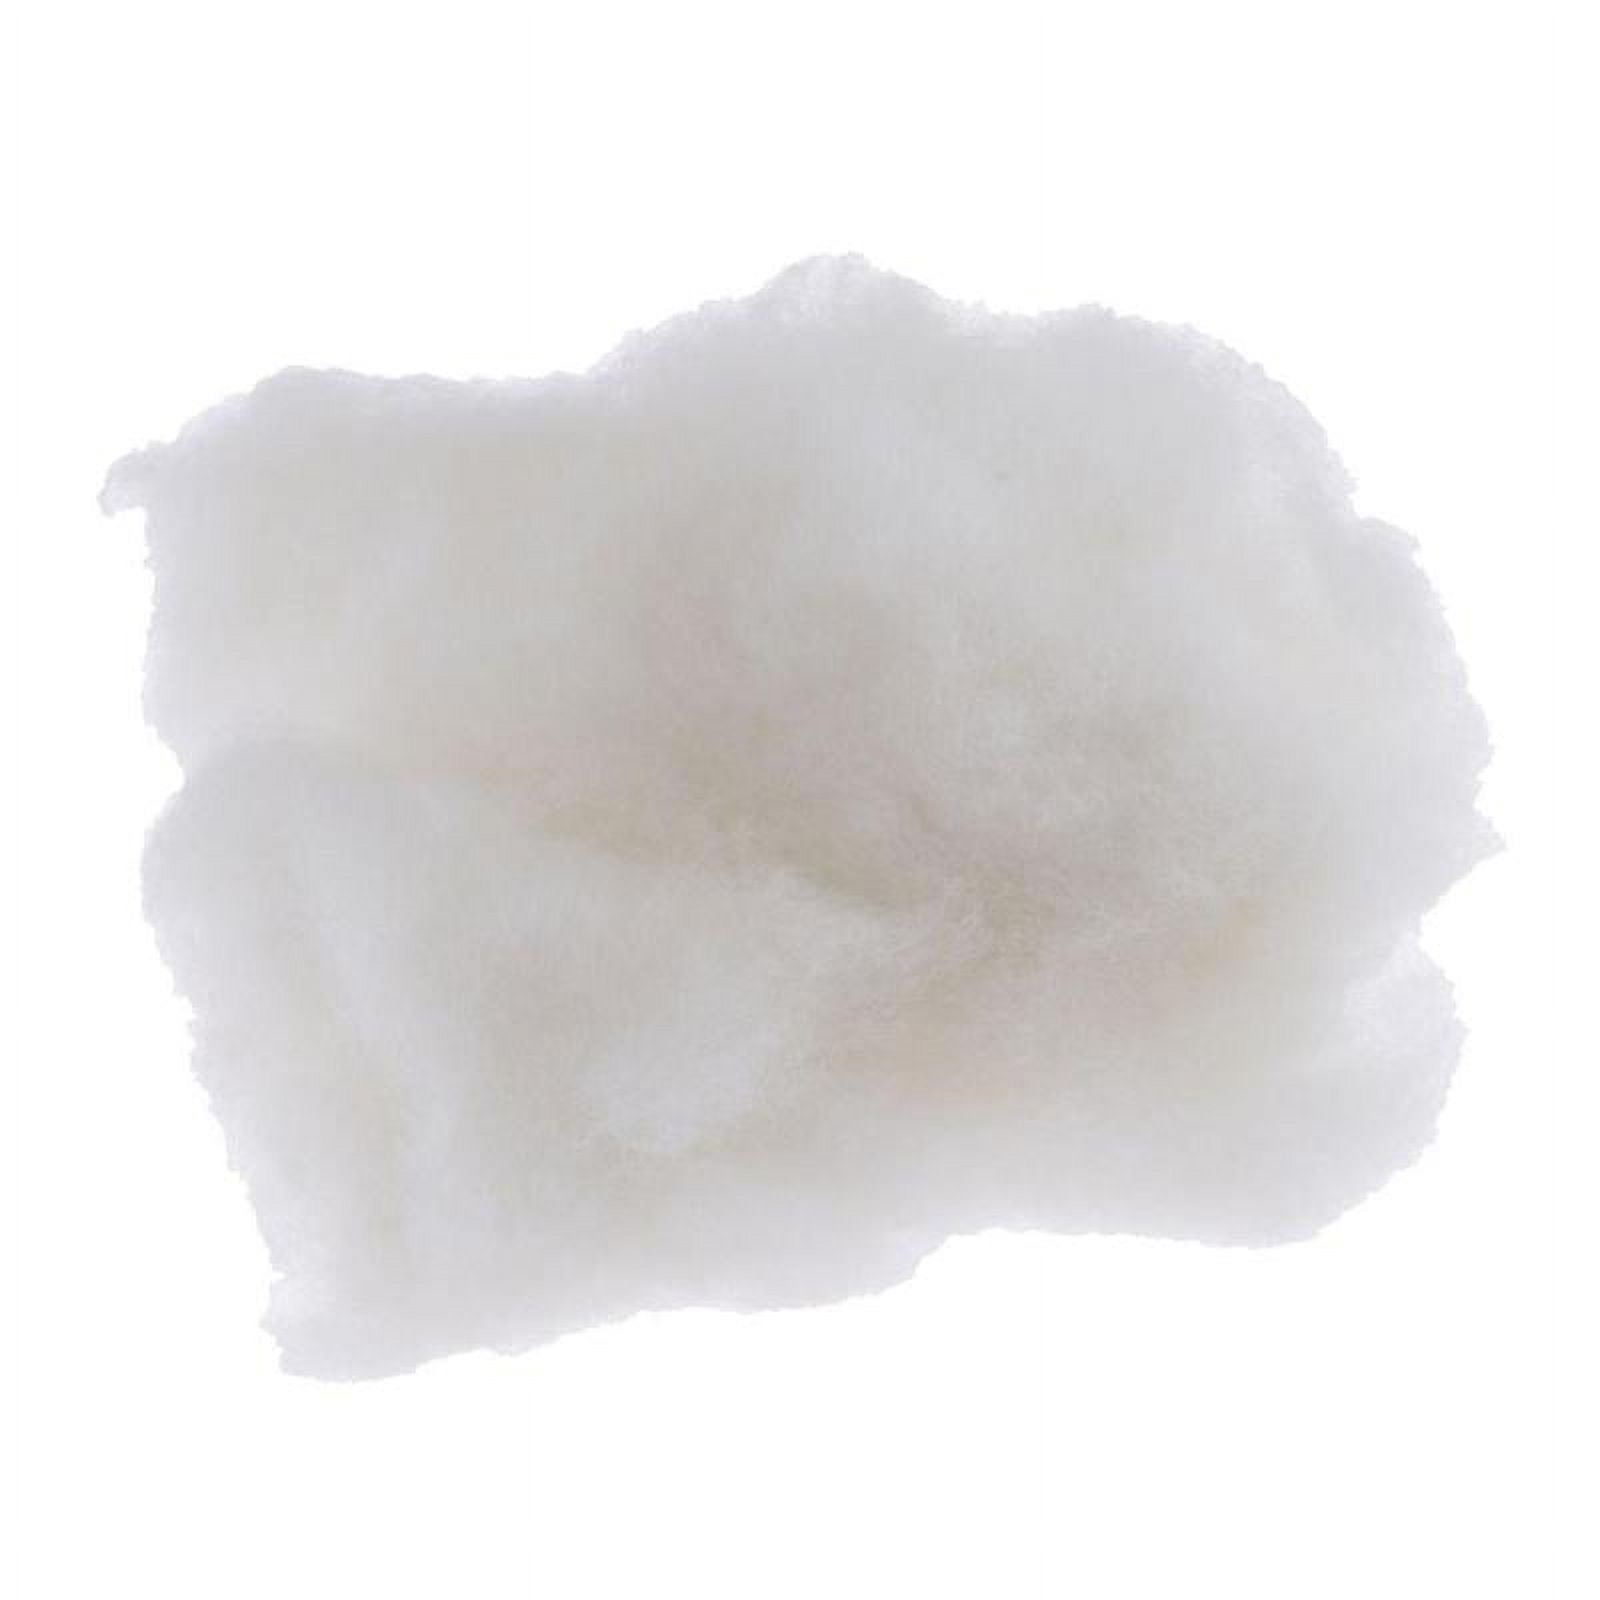 Mybecca Polyester Fiber Fill for Re-Stuffing Pillows, Stuff Toys, Quilts,  Paddings, Pouf, Fiberfill, Stuffing, Filling (8 oz) SALE!